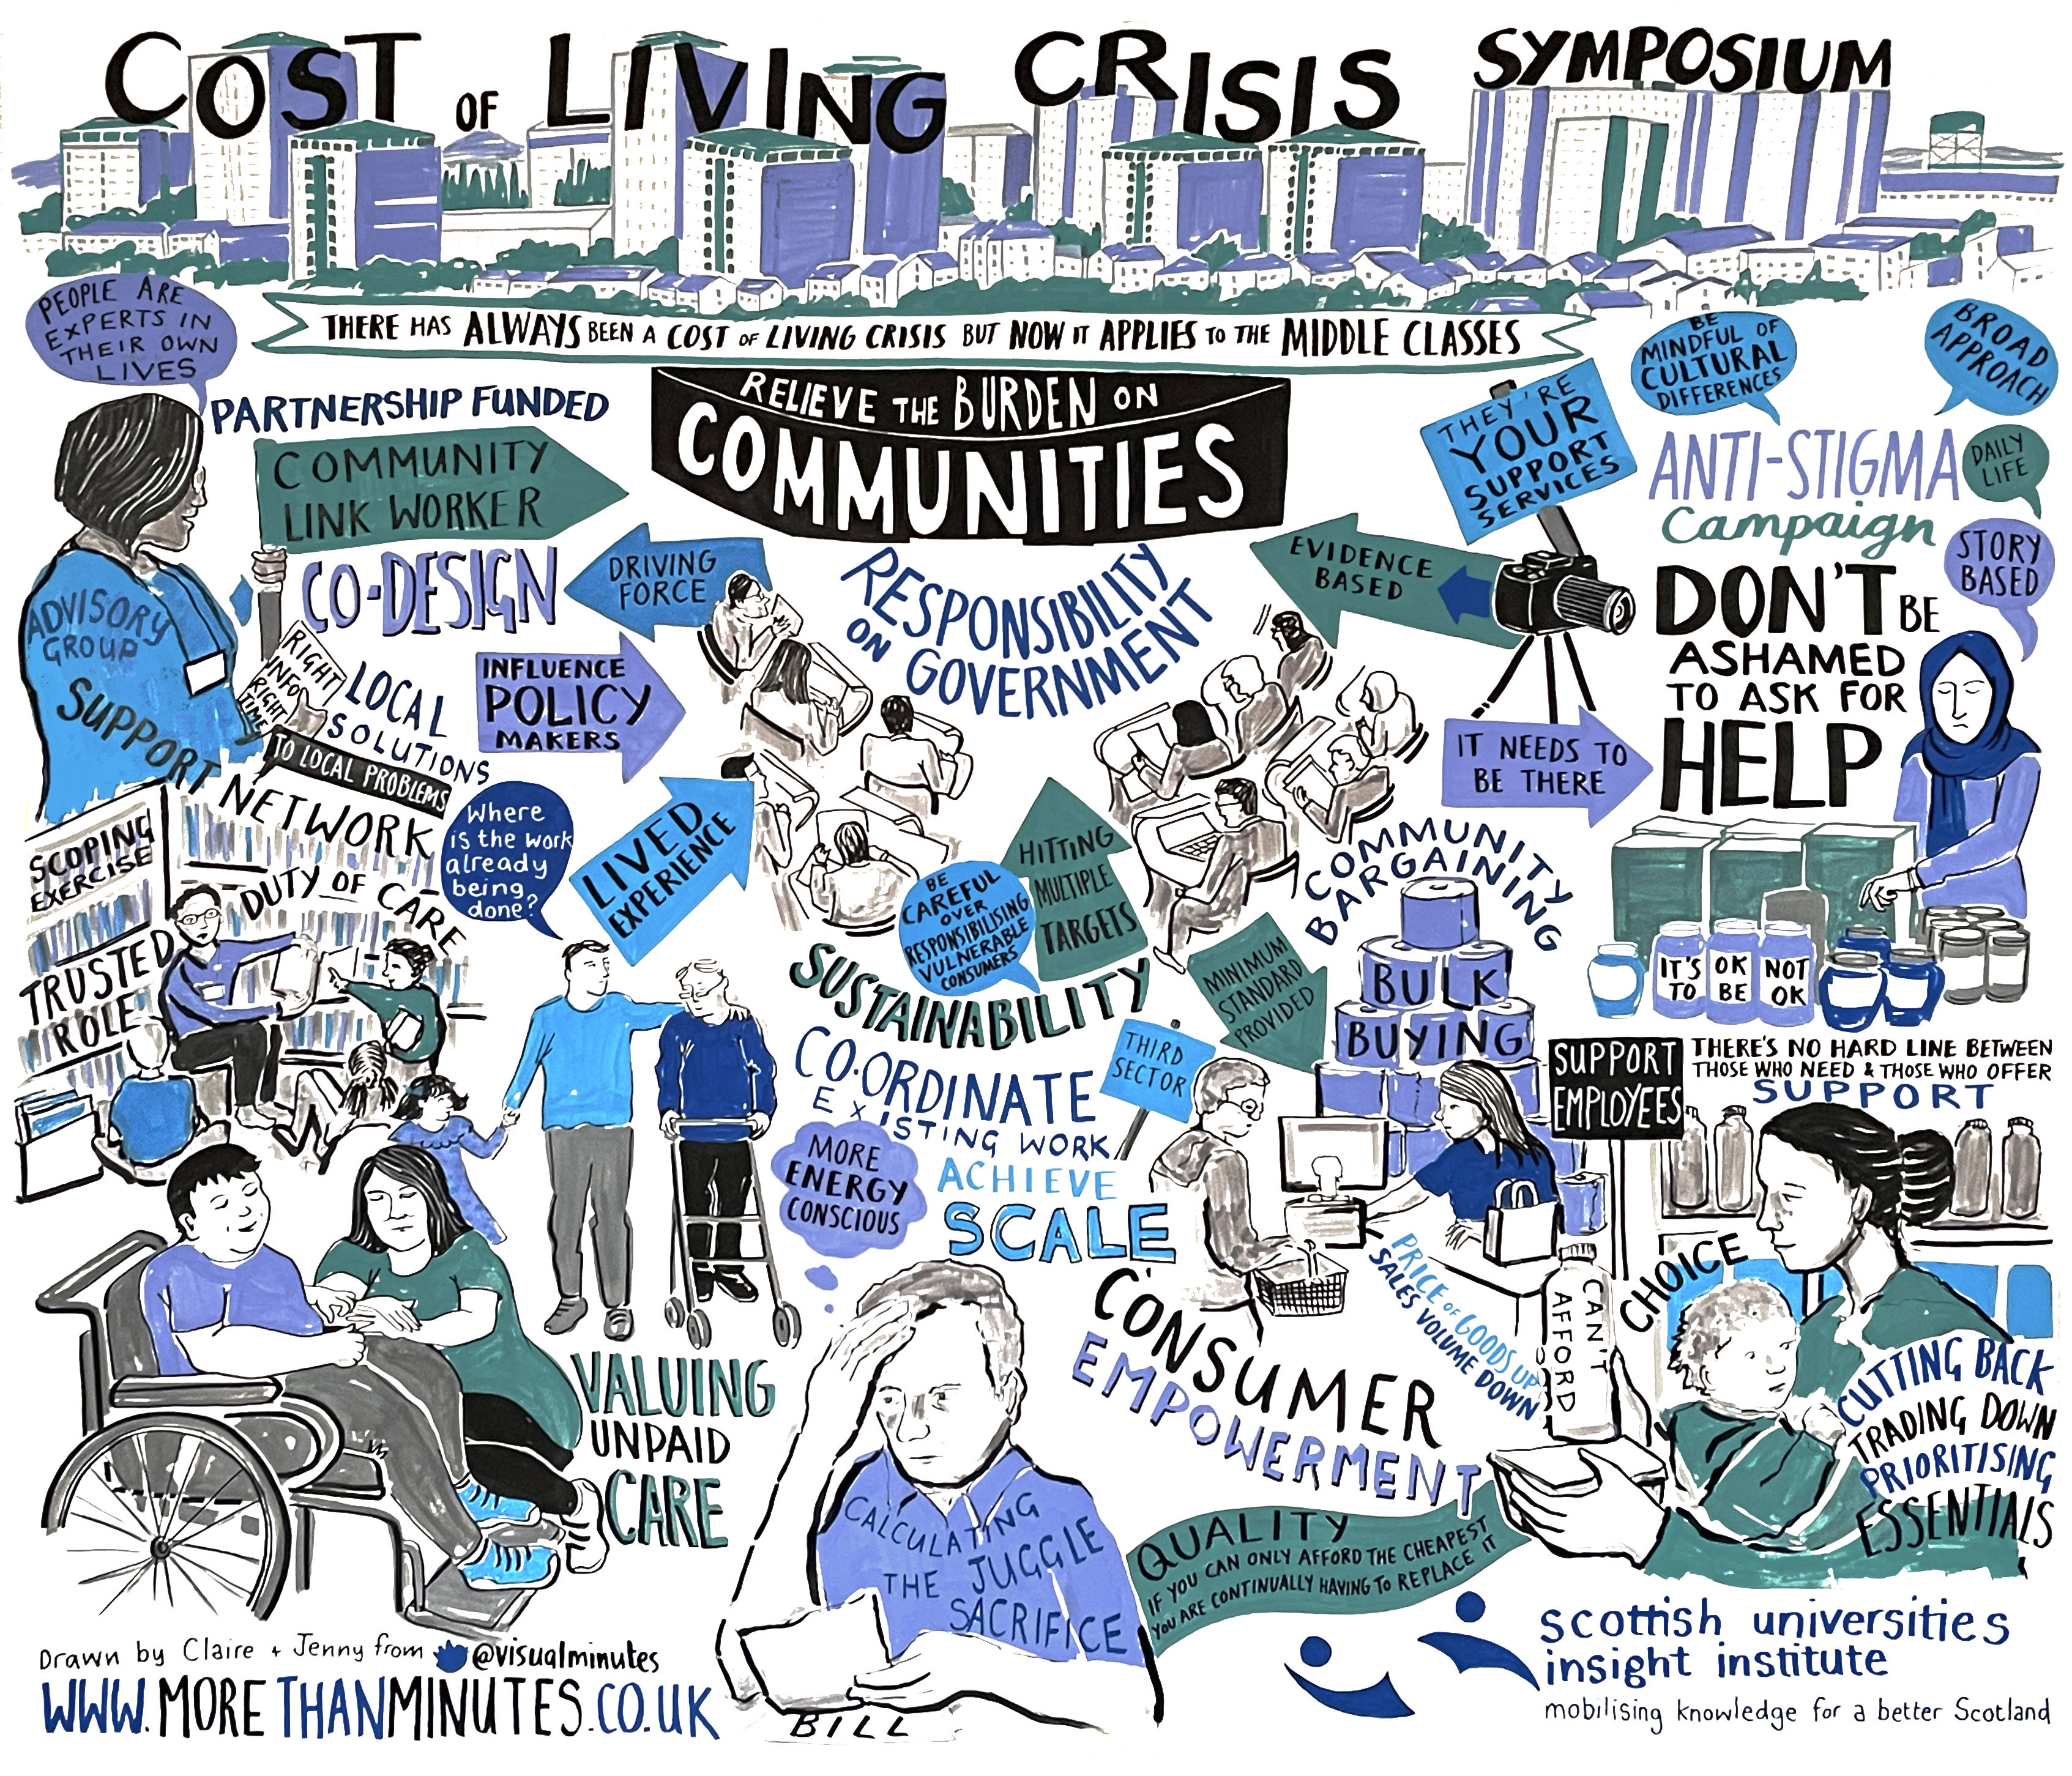 Hand-drawn illustration entitled Cost of Living Crisis Symposium showing a skyline of apartment blocks, key phrases and vignettes showing people in situations of daily hardship.